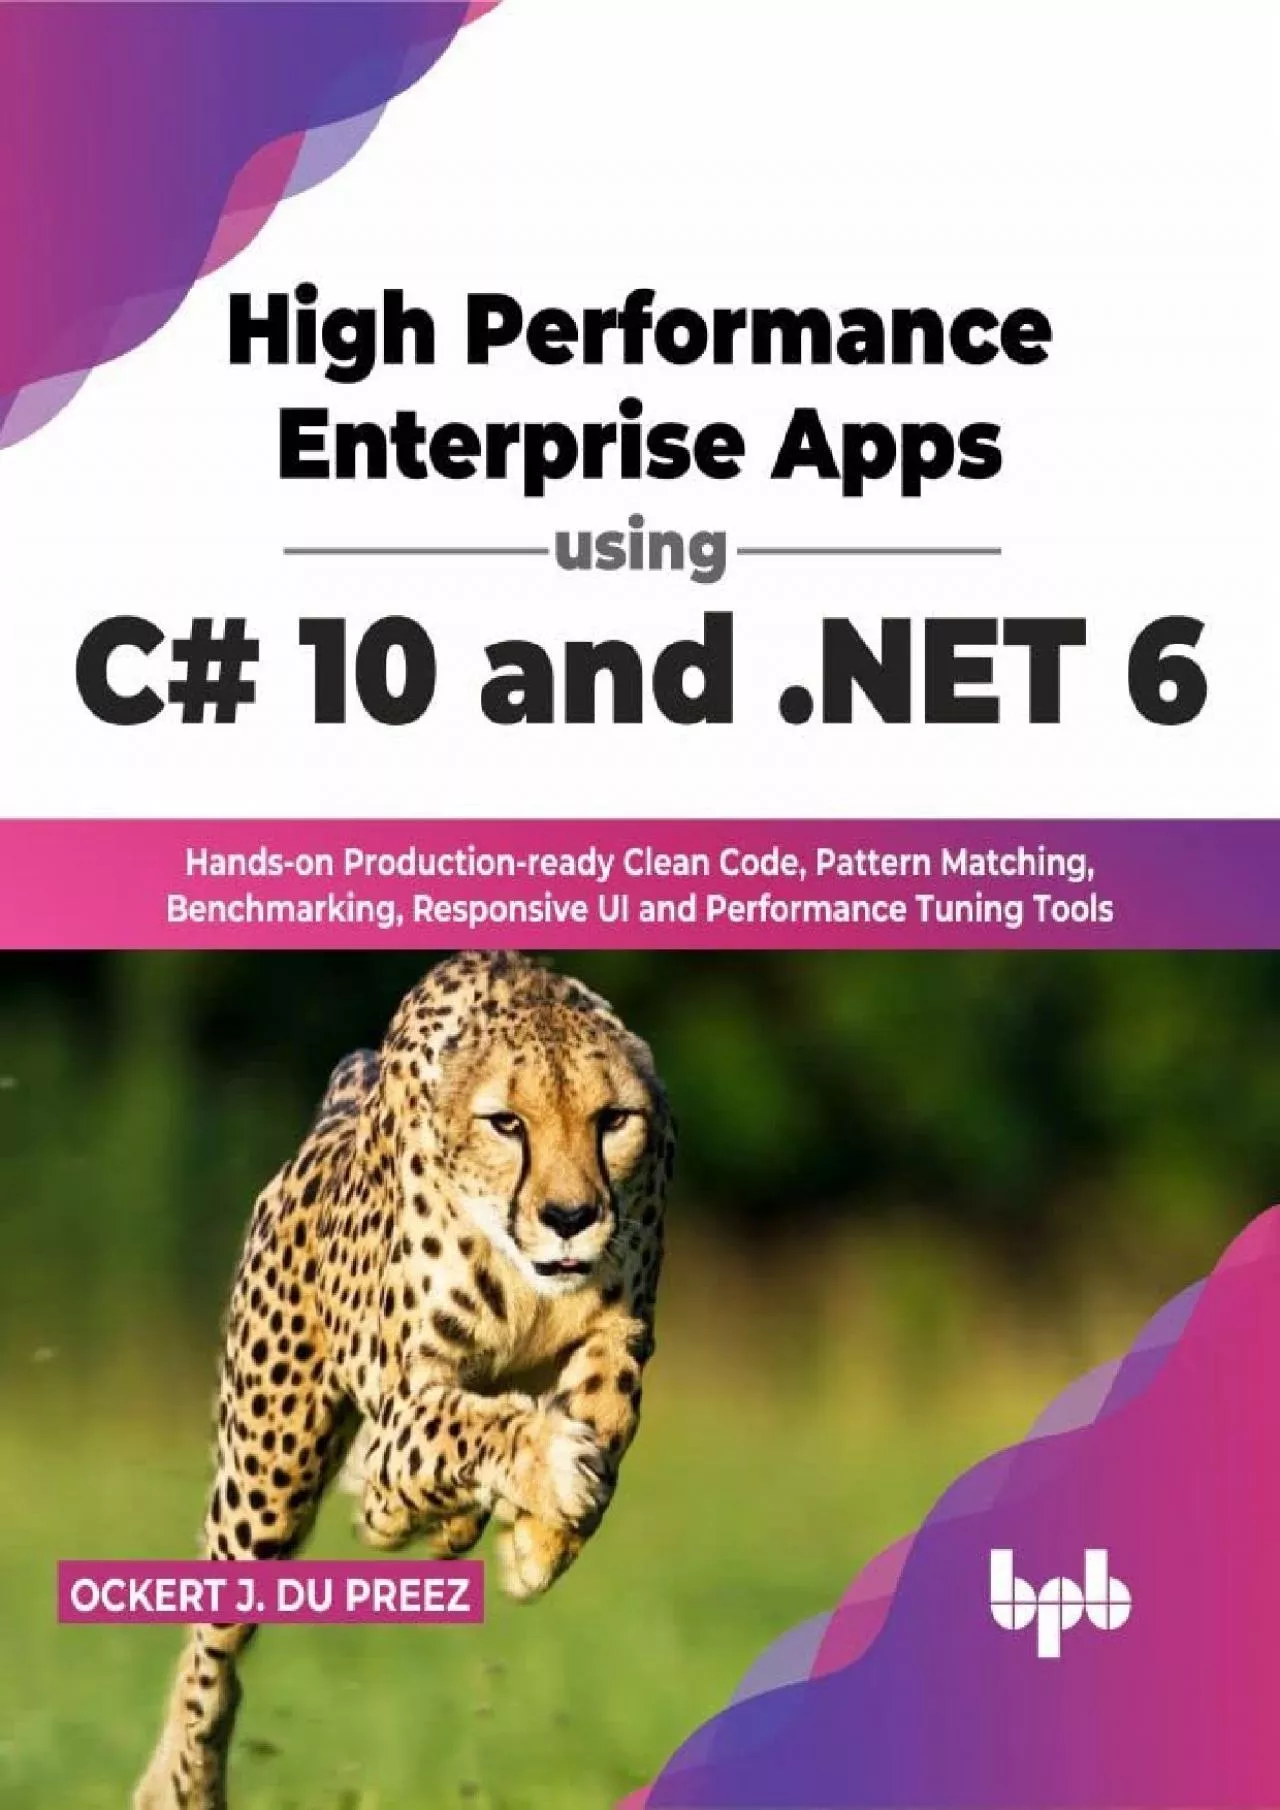 [READING BOOK]-High Performance Enterprise Apps using C 10 and .NET 6: Hands-on Production-ready